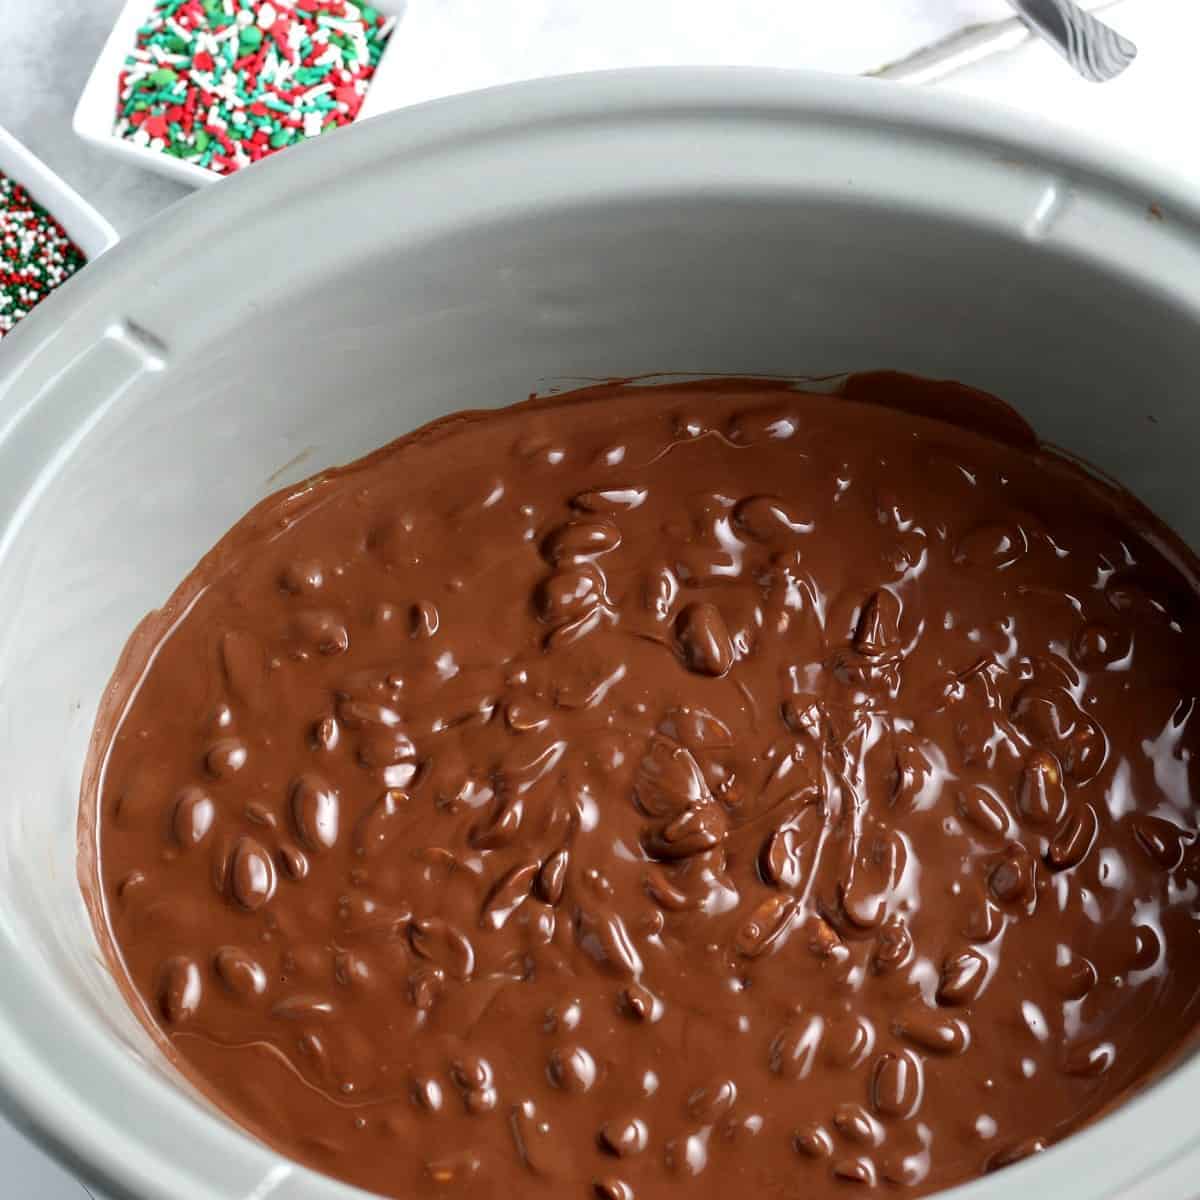 Looking into a slow cooker are the melted chocolate and peanut candy concoction.